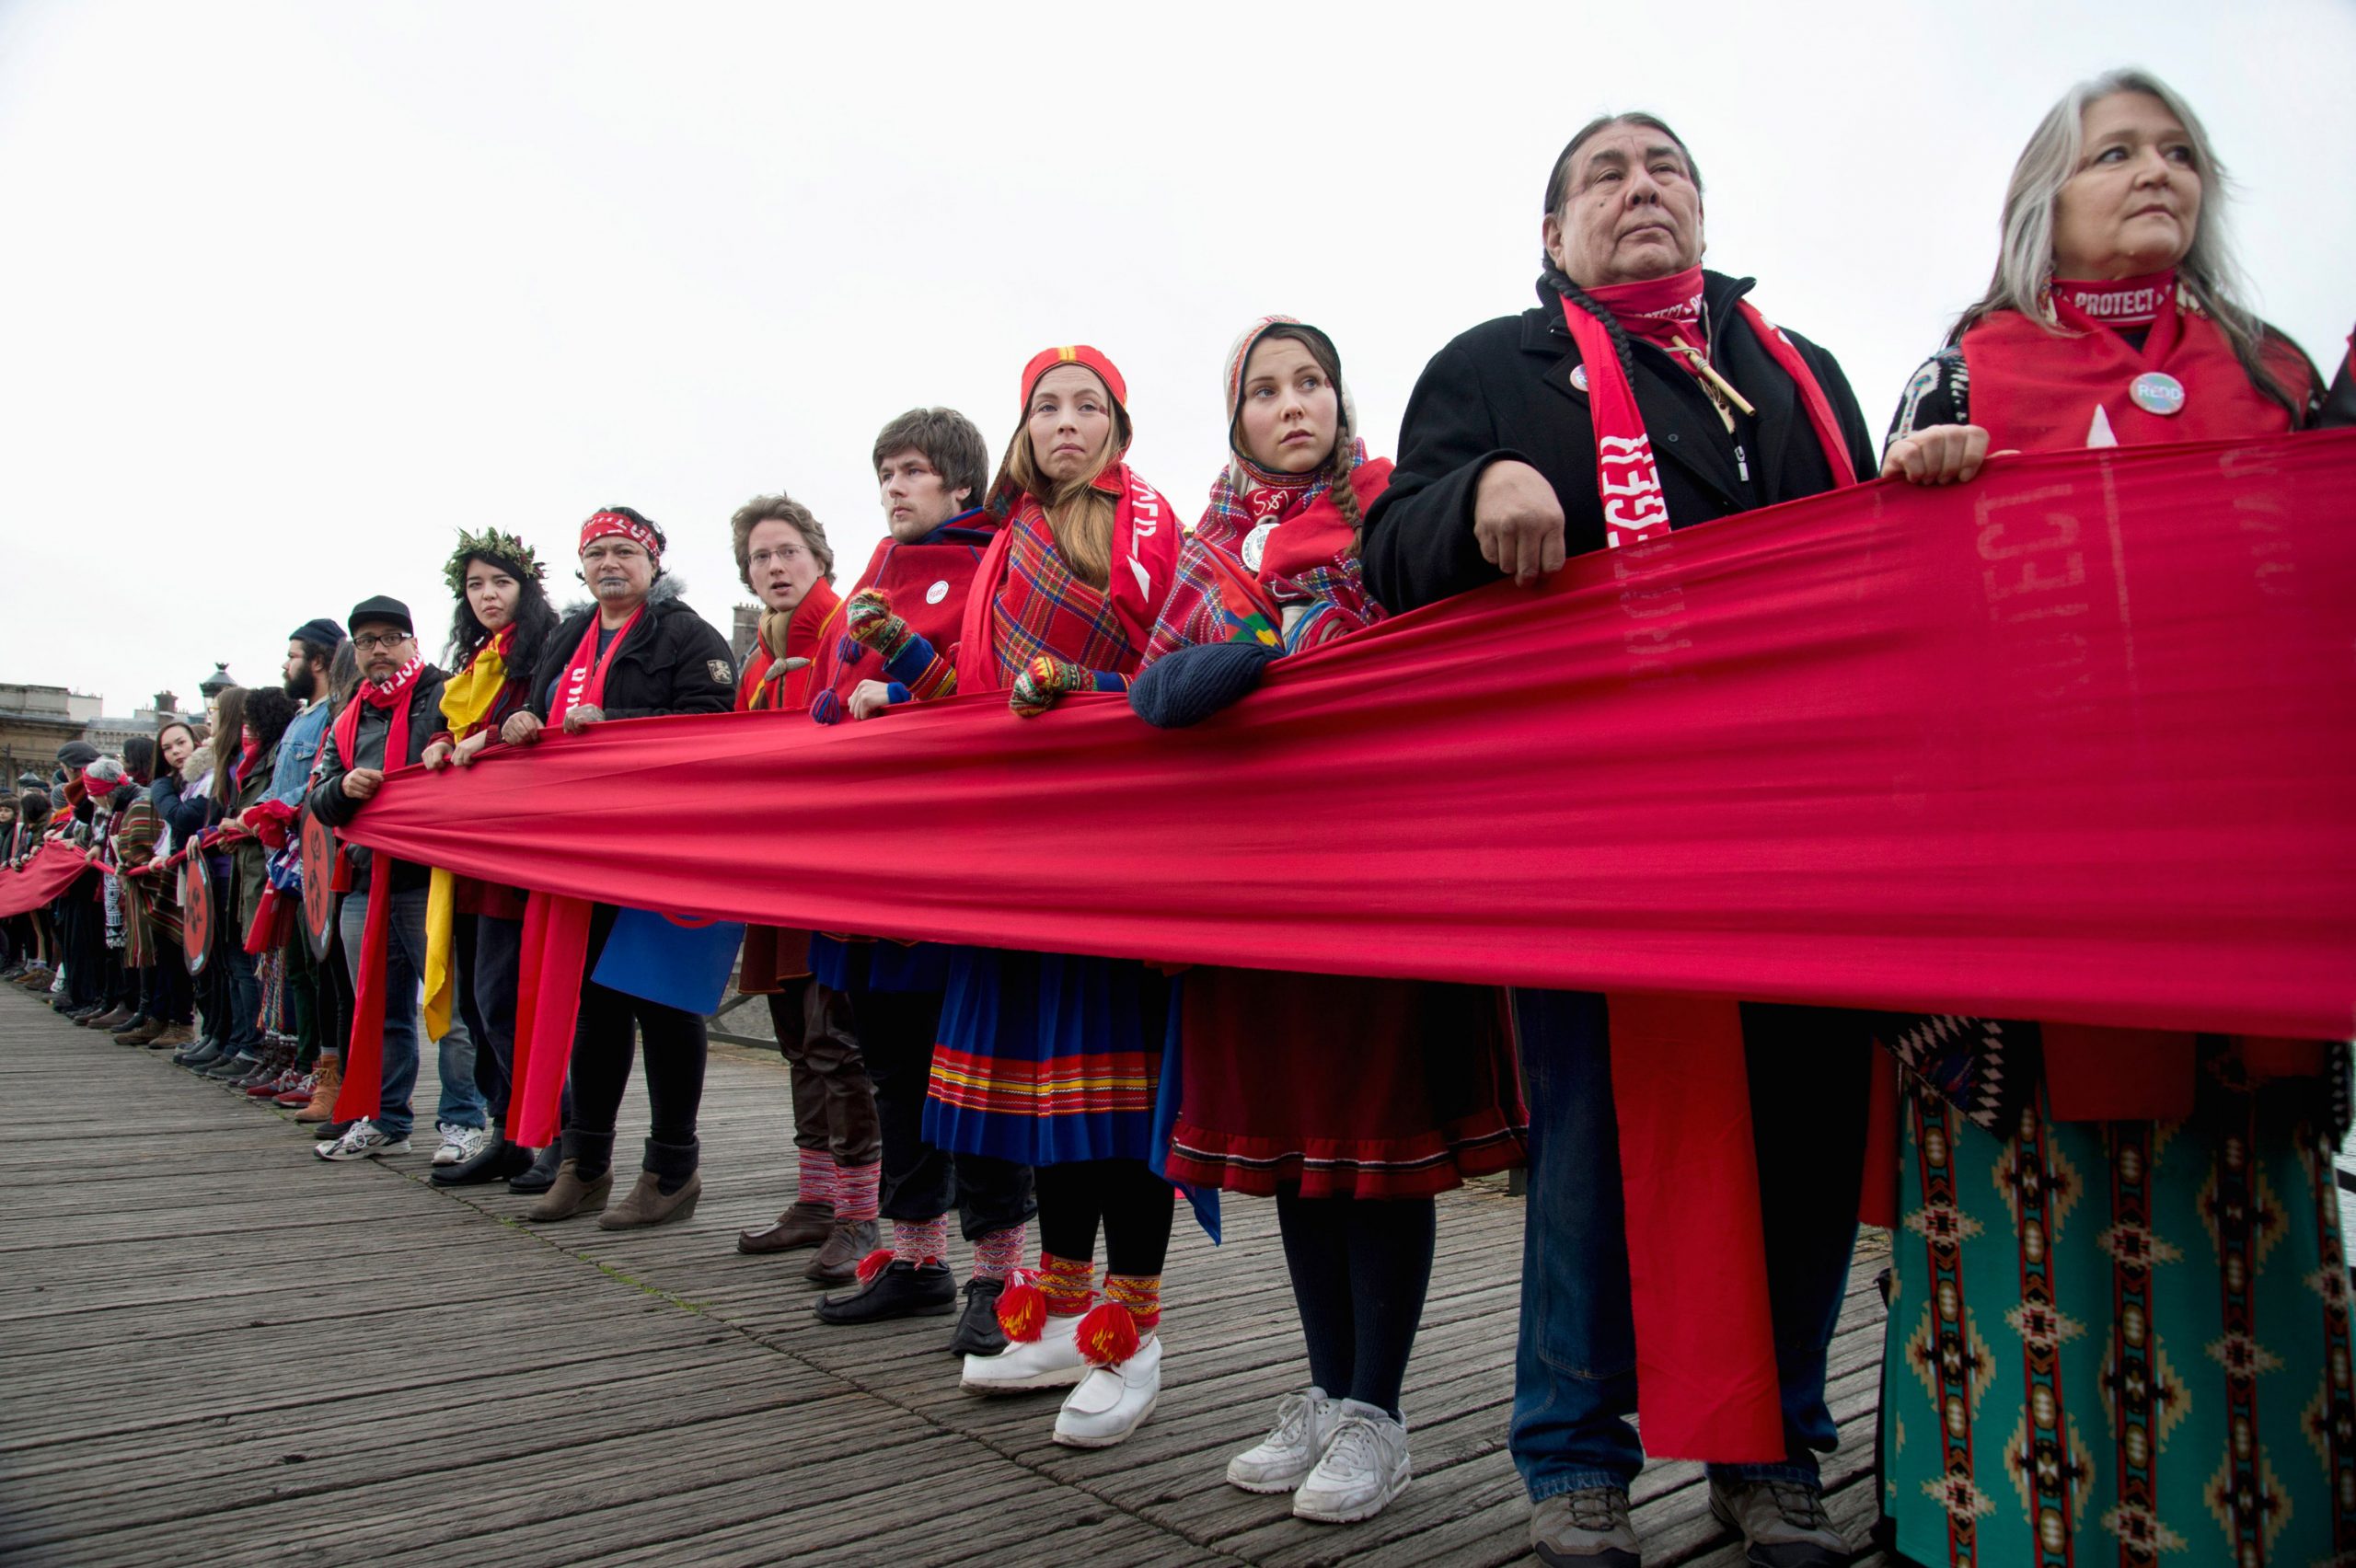 Indigenous activists holding a ‘Red Line’ on the Pont des Arts during the COP 21 UN Climate Conference in Paris, France. IPLCs are participating actively in policy forums and global climate change initiatives. Credit: Jenny Matthews.